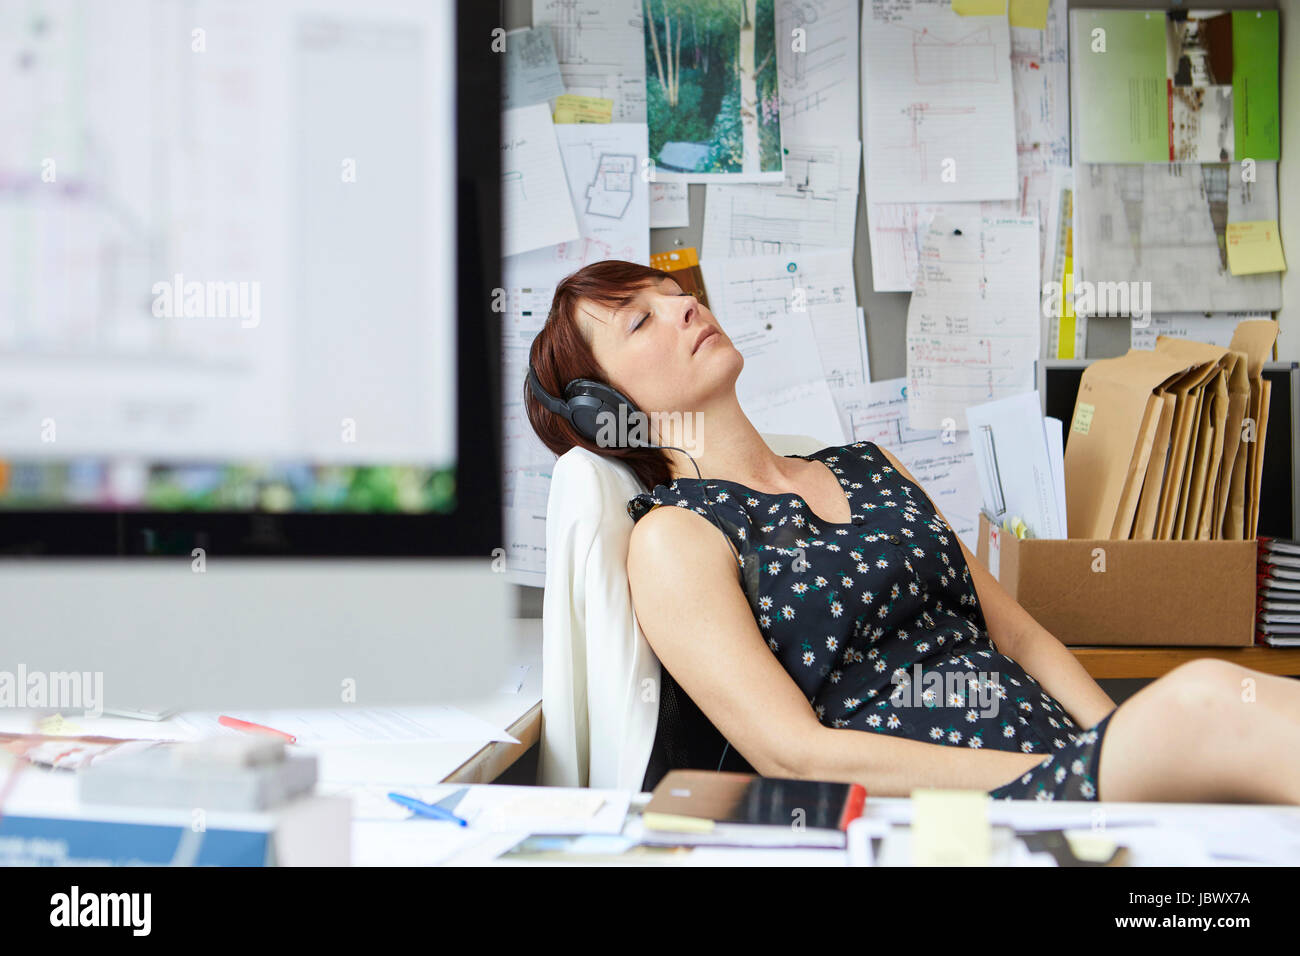 Female designer at office desk listening to headphone music  with eyes closed Stock Photo